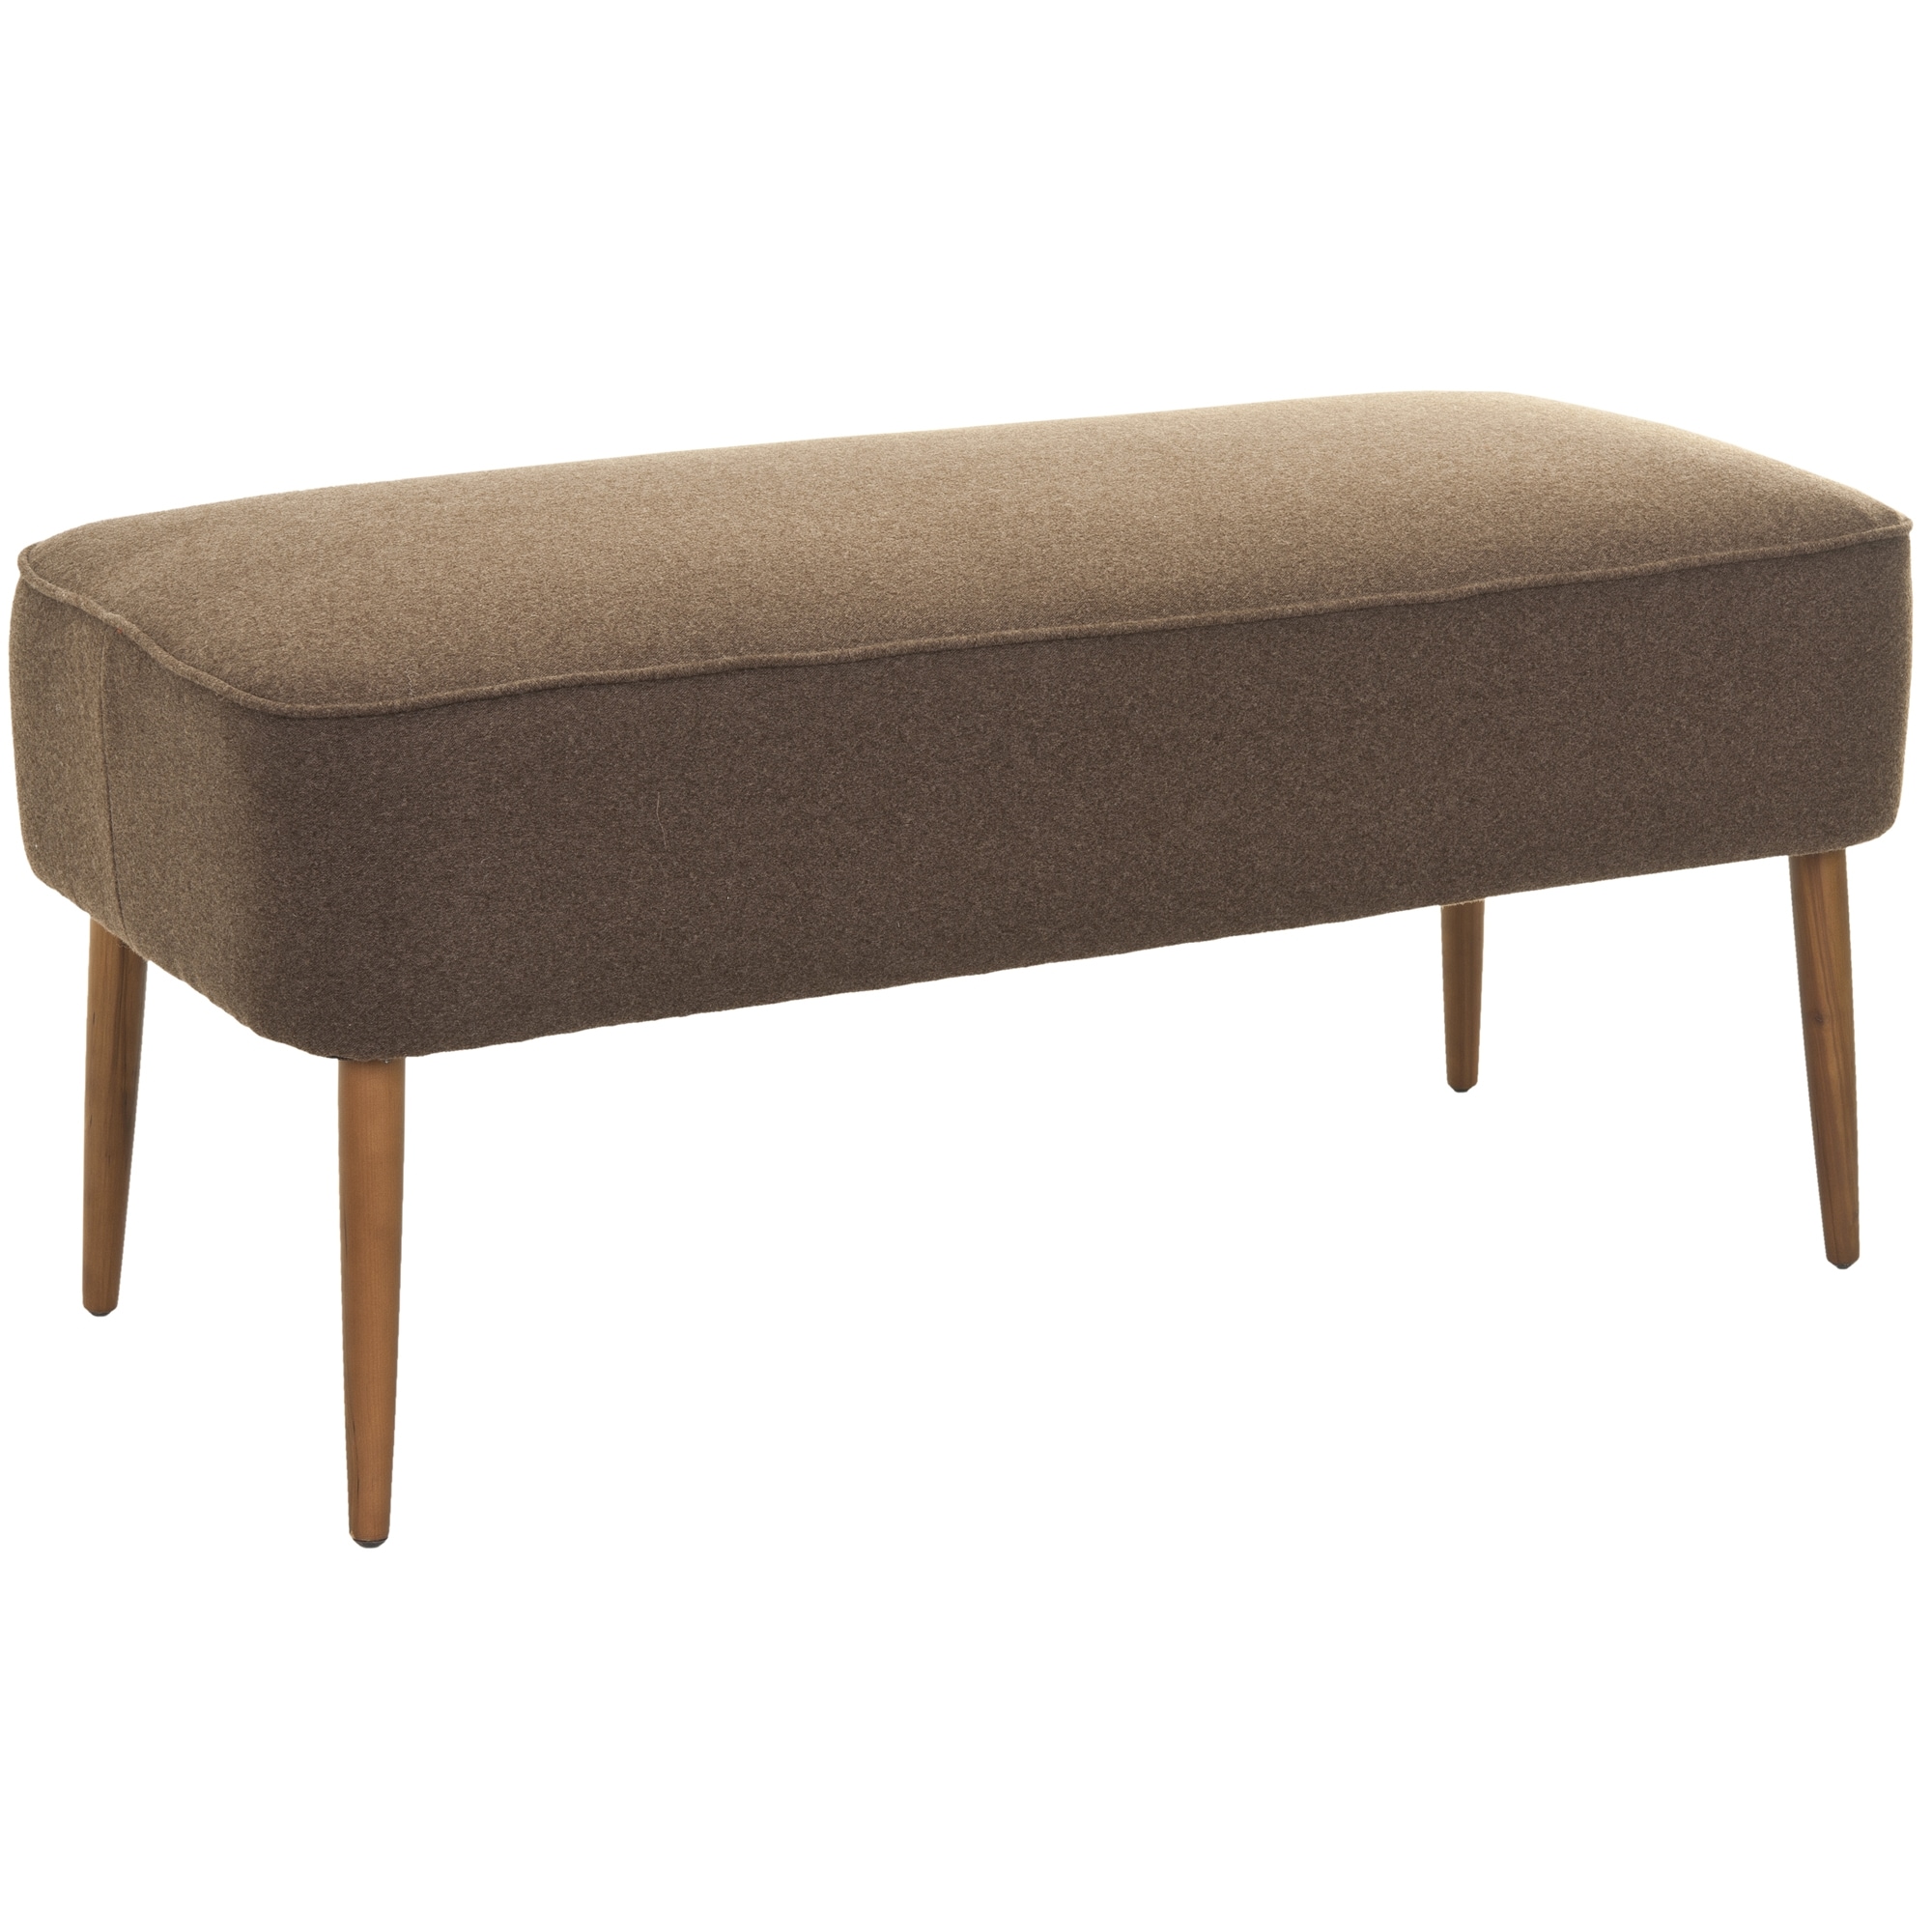 Safavieh Retro Brown Wool Bench (BrownMaterials Birch Wood and Wool FabricFinish BlackDimensions 18.3 inches high x 39.6 inches wide x 19.9 inches deep )